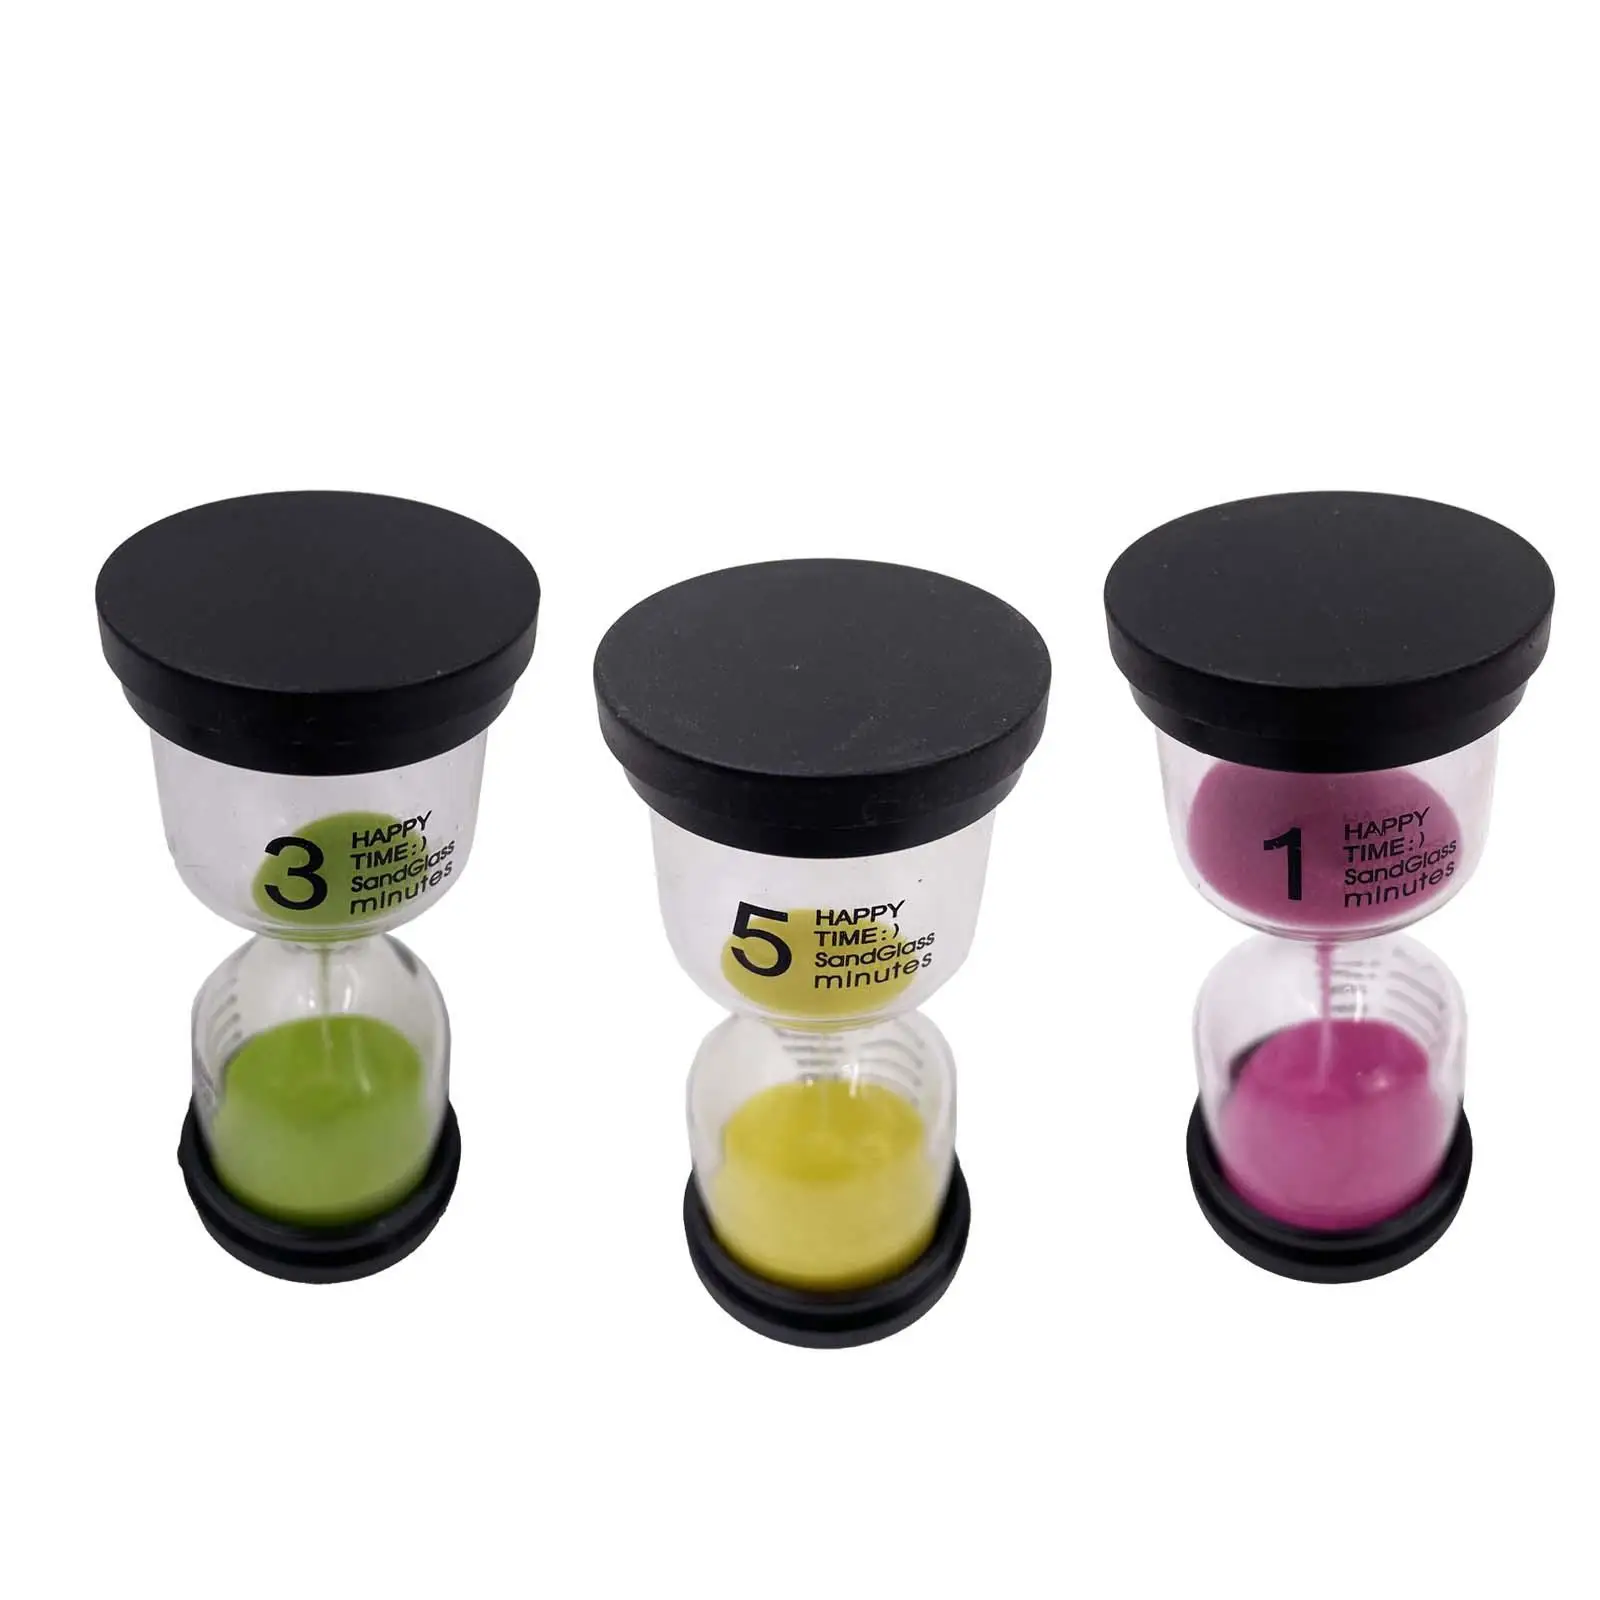 3x Sand Clock timers Sandglass timers Durable, Decorative Colorful Hourglass for Kitchen, Mantel Book Shelf Office Decoration